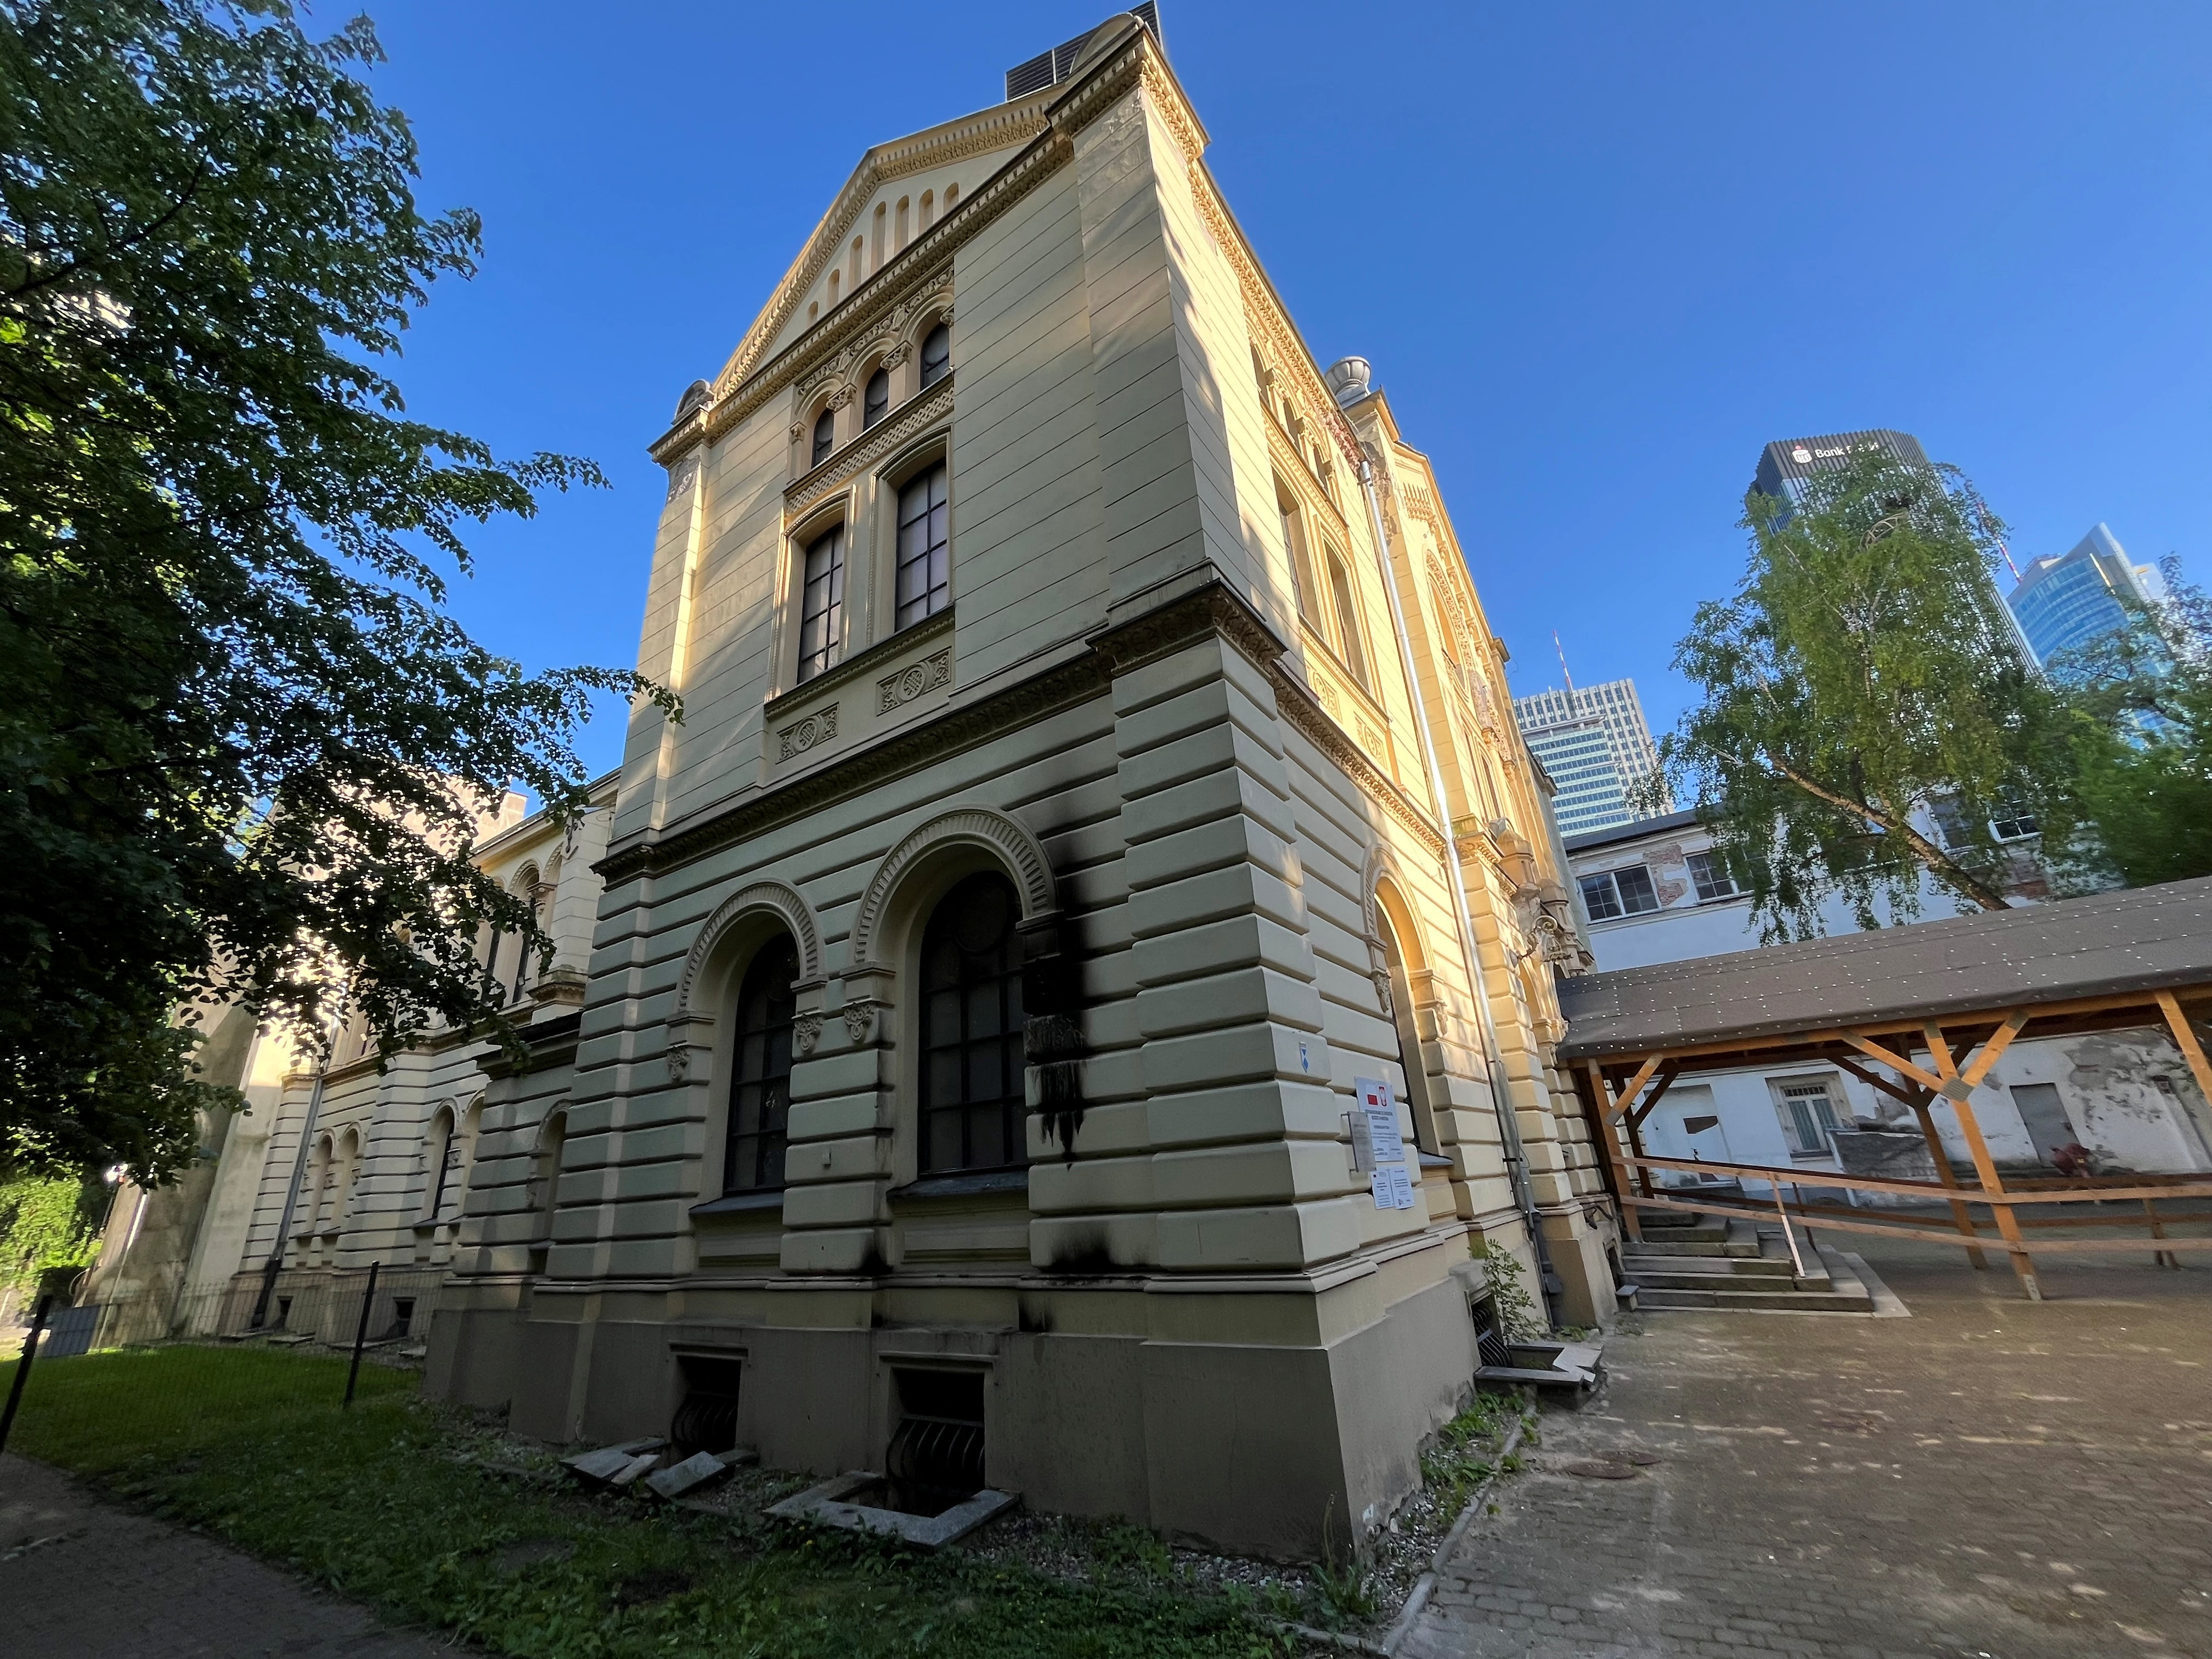 Synagogue struck by bottle containing flammable substance in Warsaw